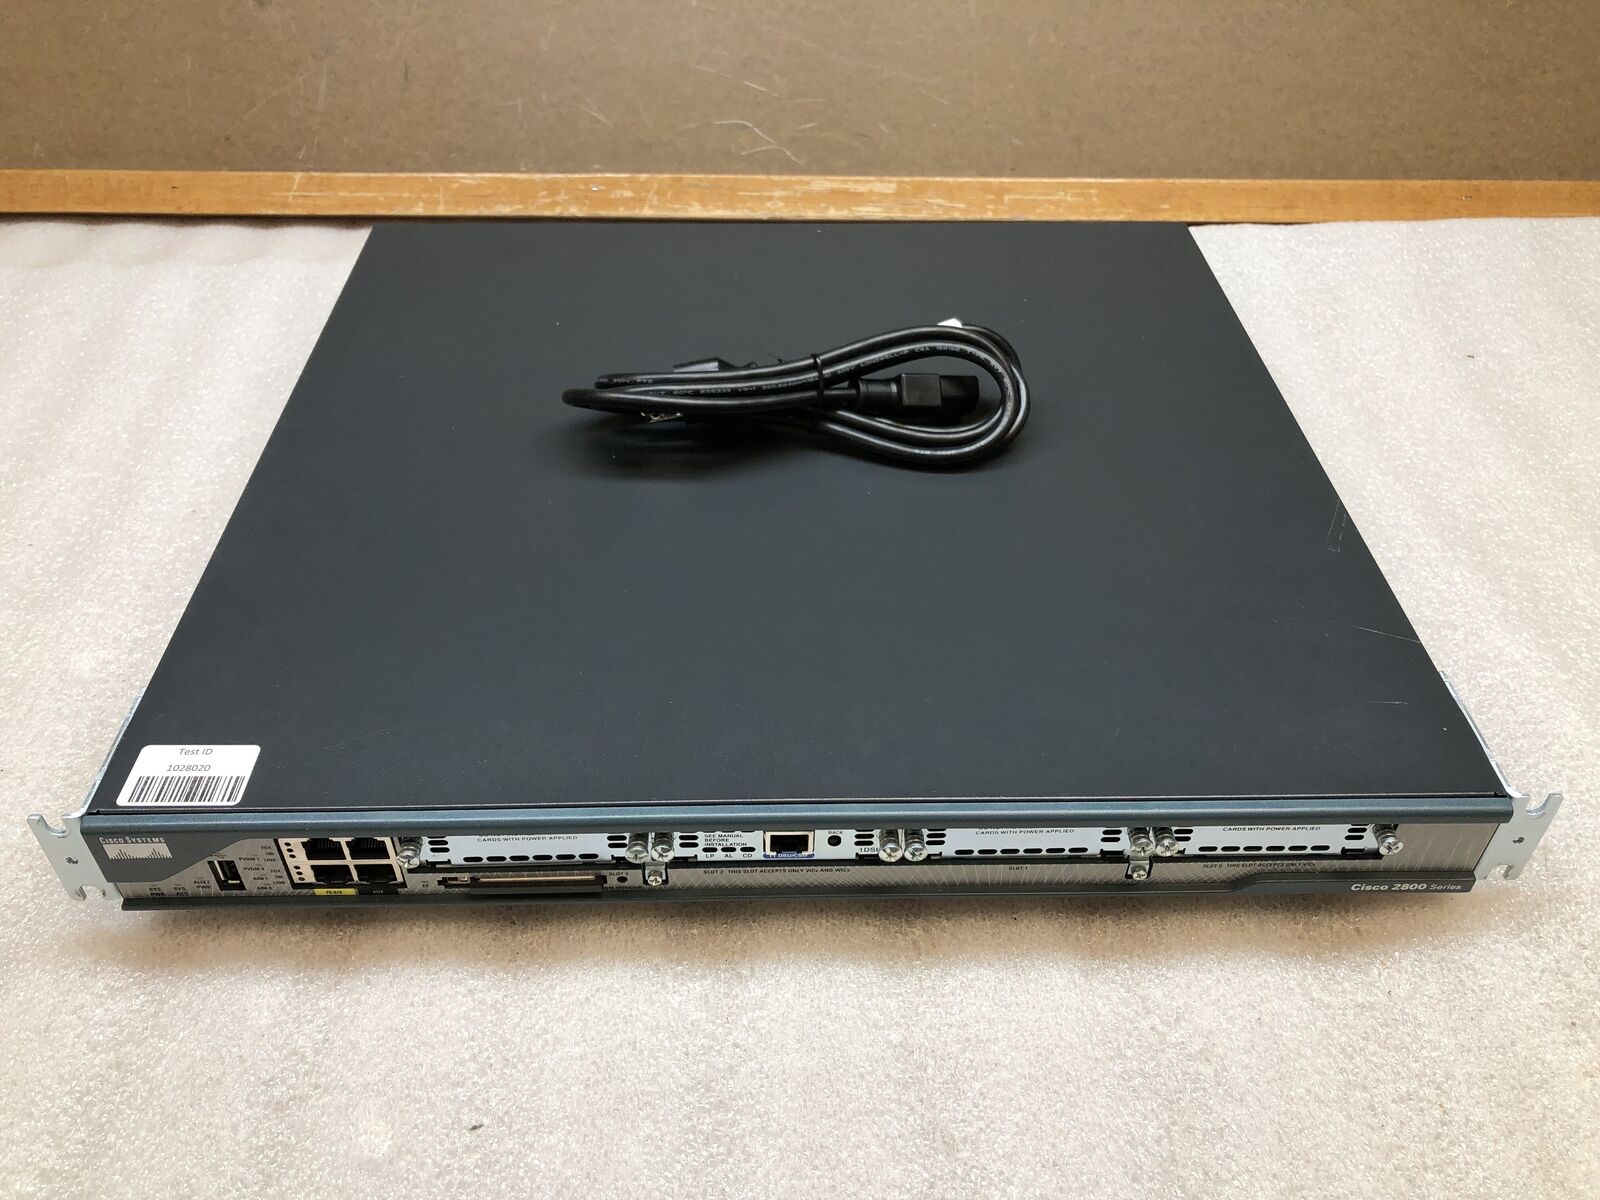 Cisco 2800 Series 2801 Integrated Services Router -TESTED & FACTORY RESET